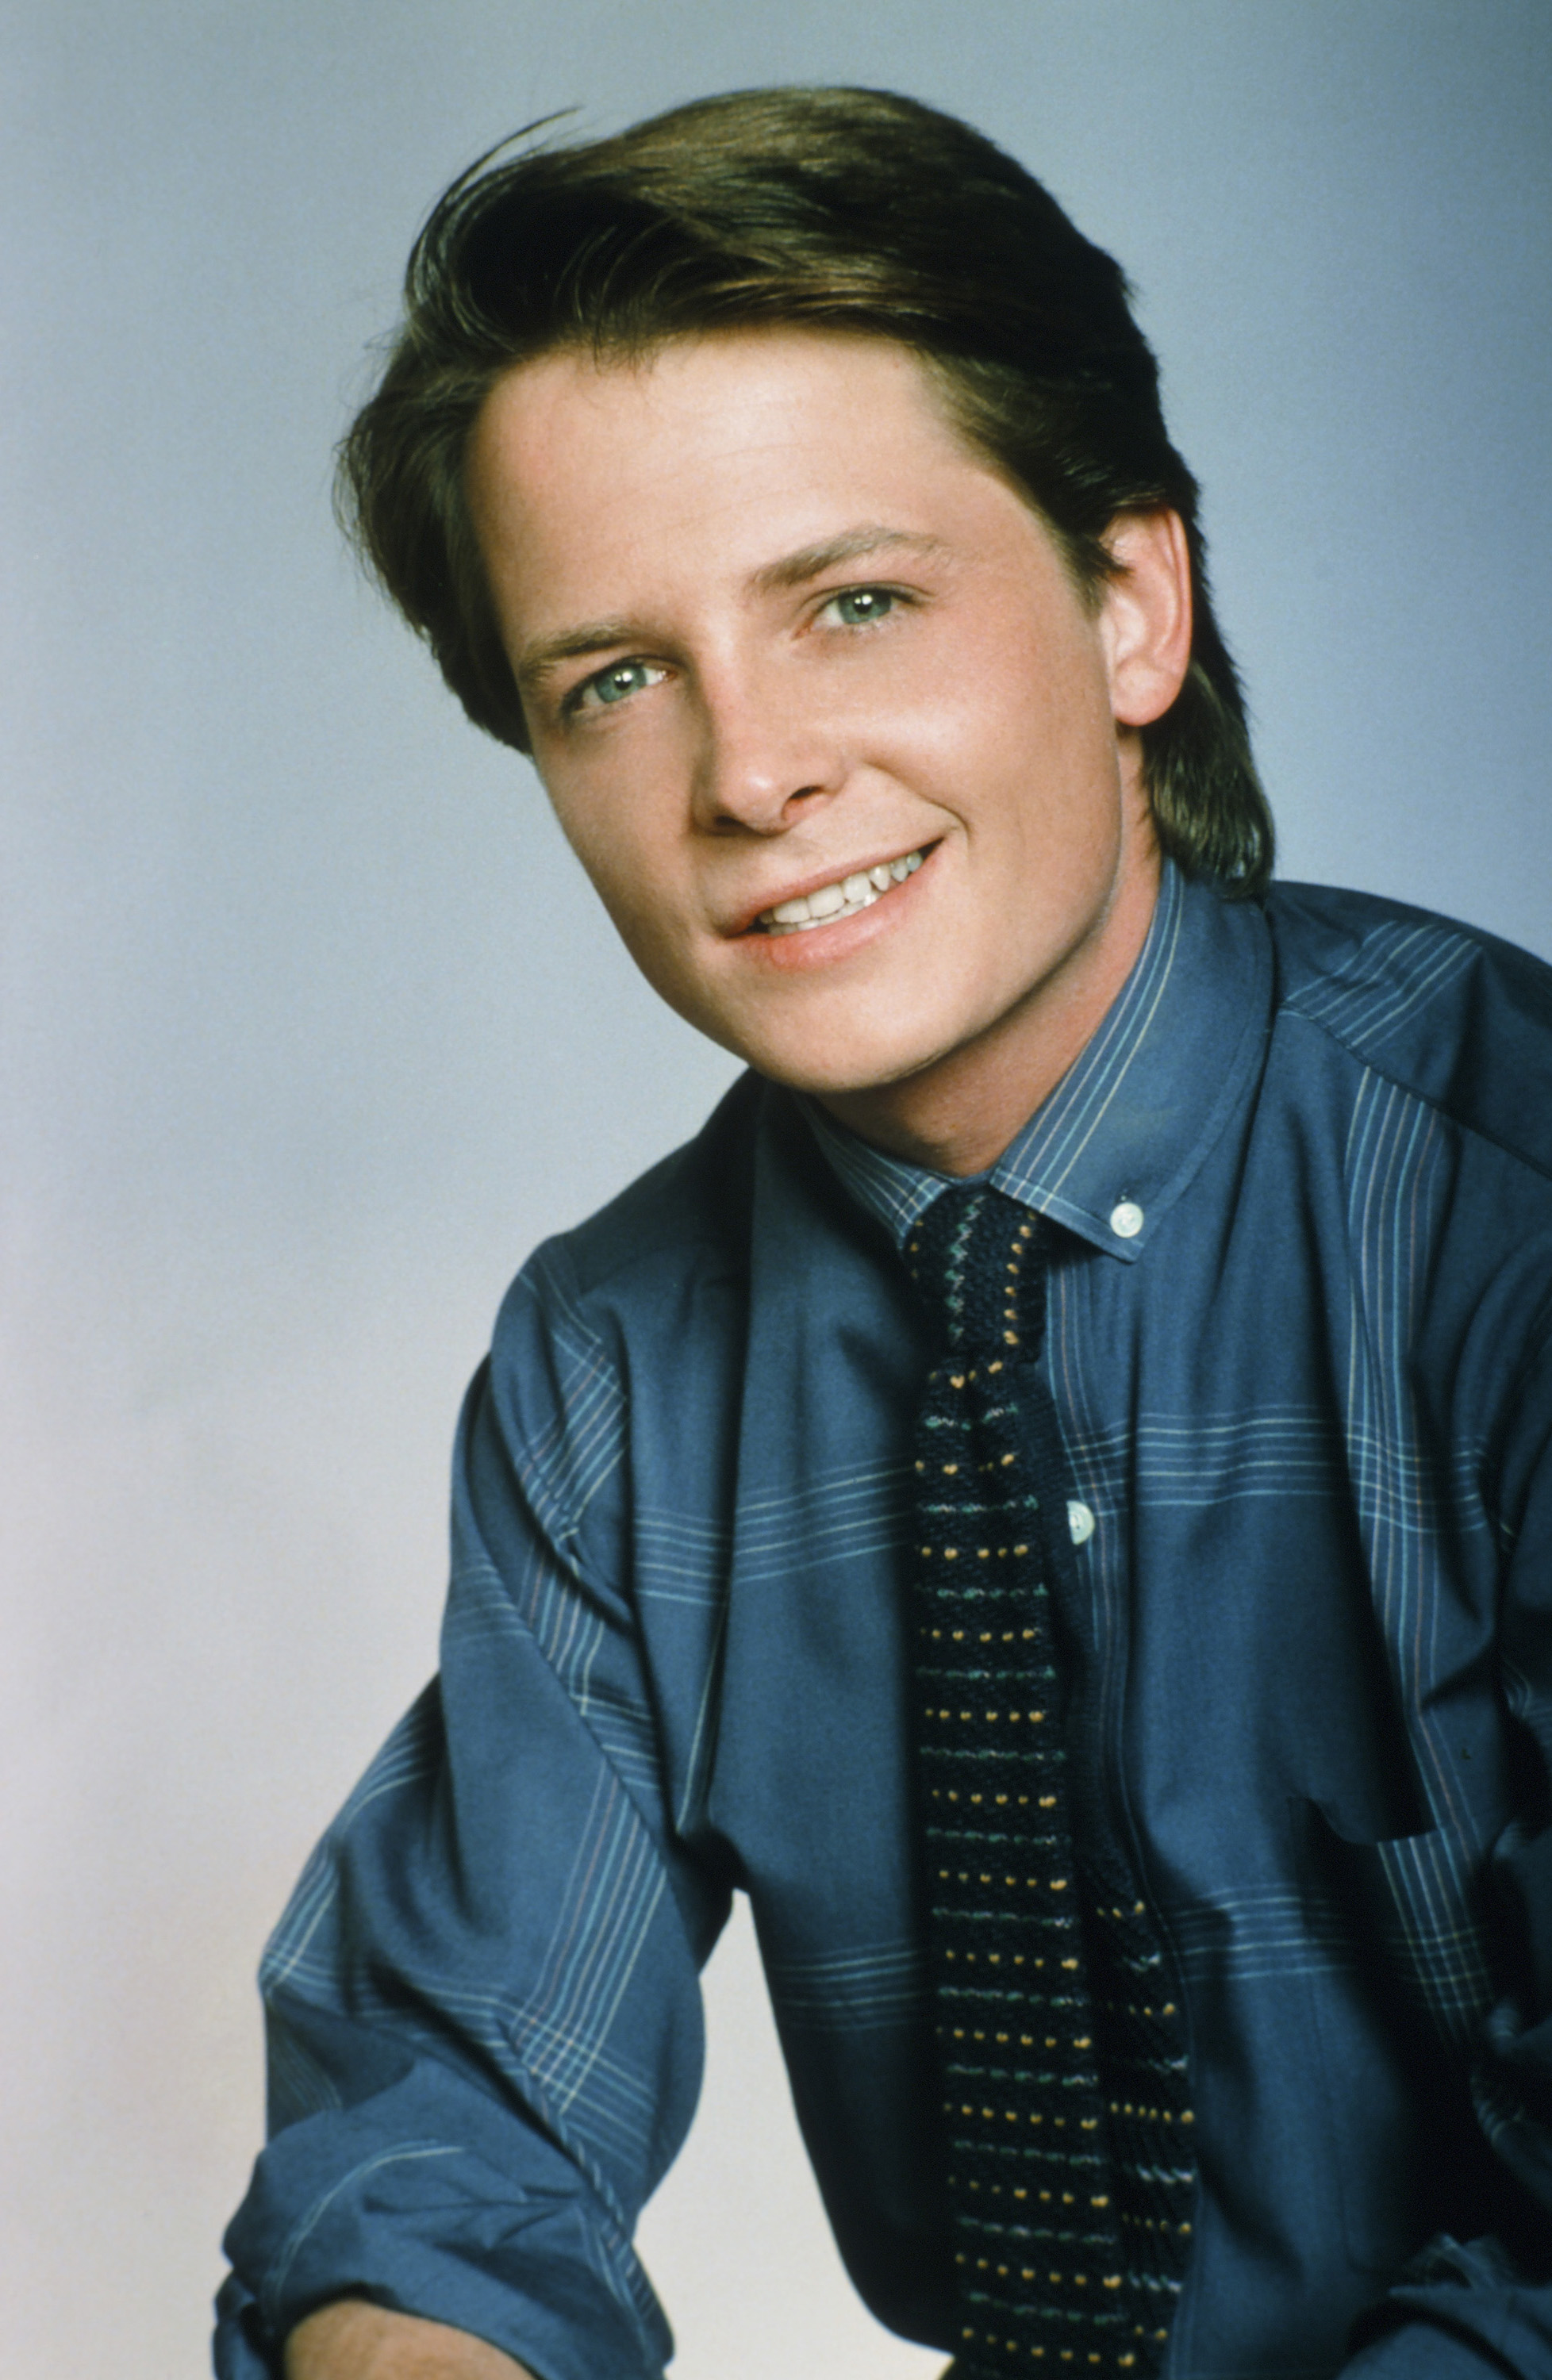 Michael J. Fox on the set of "Family Ties" on August 5, 1985 | Source: Getty Images